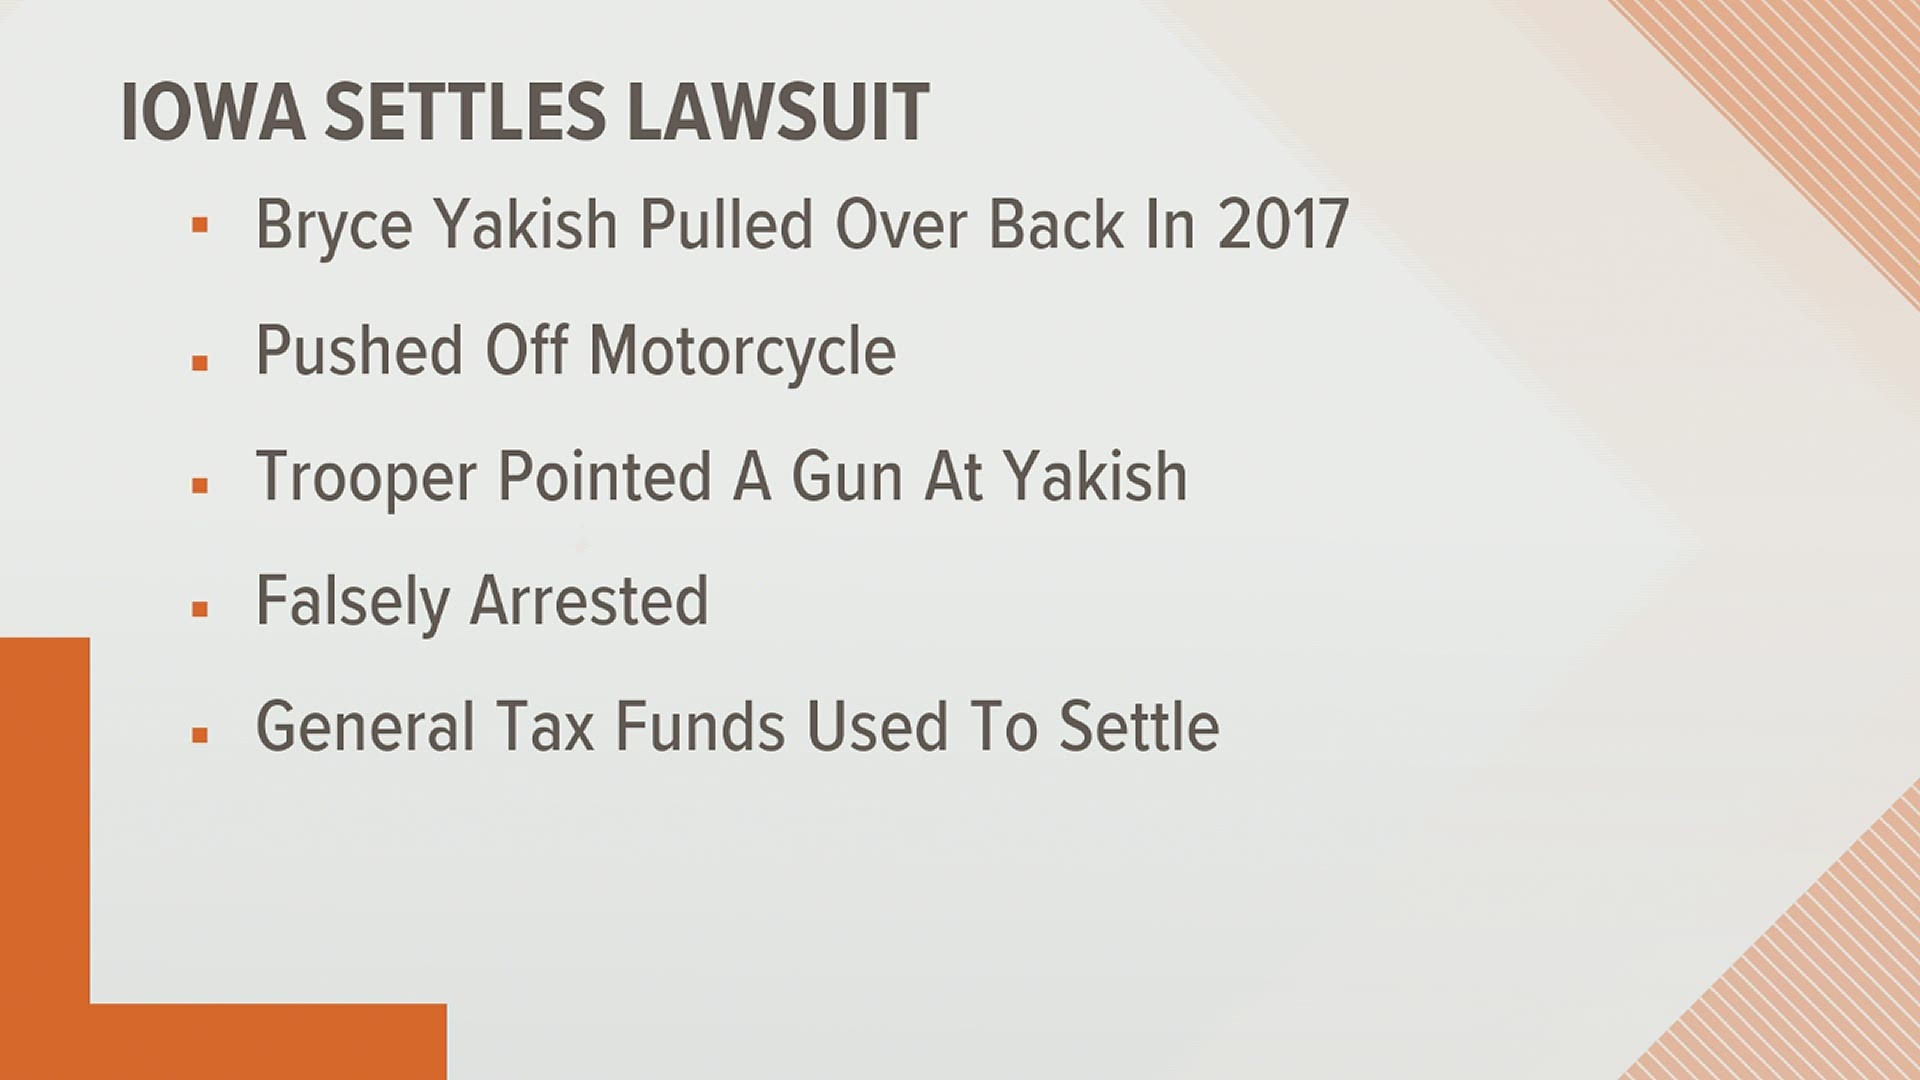 Bryce Yakish will receive $225k after former Iowa State Patrol trooper Robert Smith knocked him over and put his knee on his neck during a 2017 traffic stop.